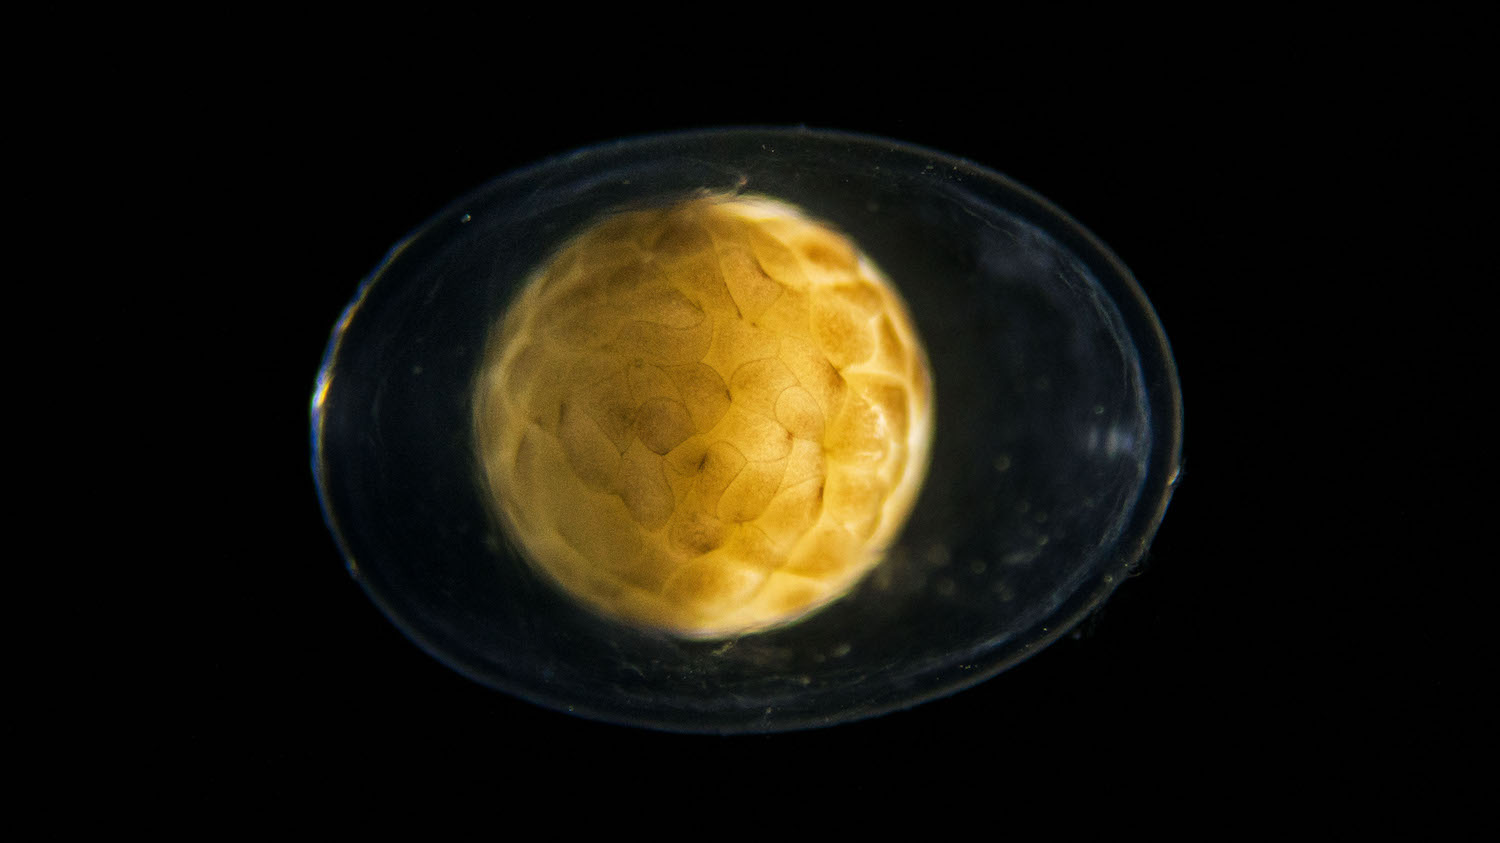 In almost no time at all, the yellow salamander embryo has already divided into hundreds of cells.